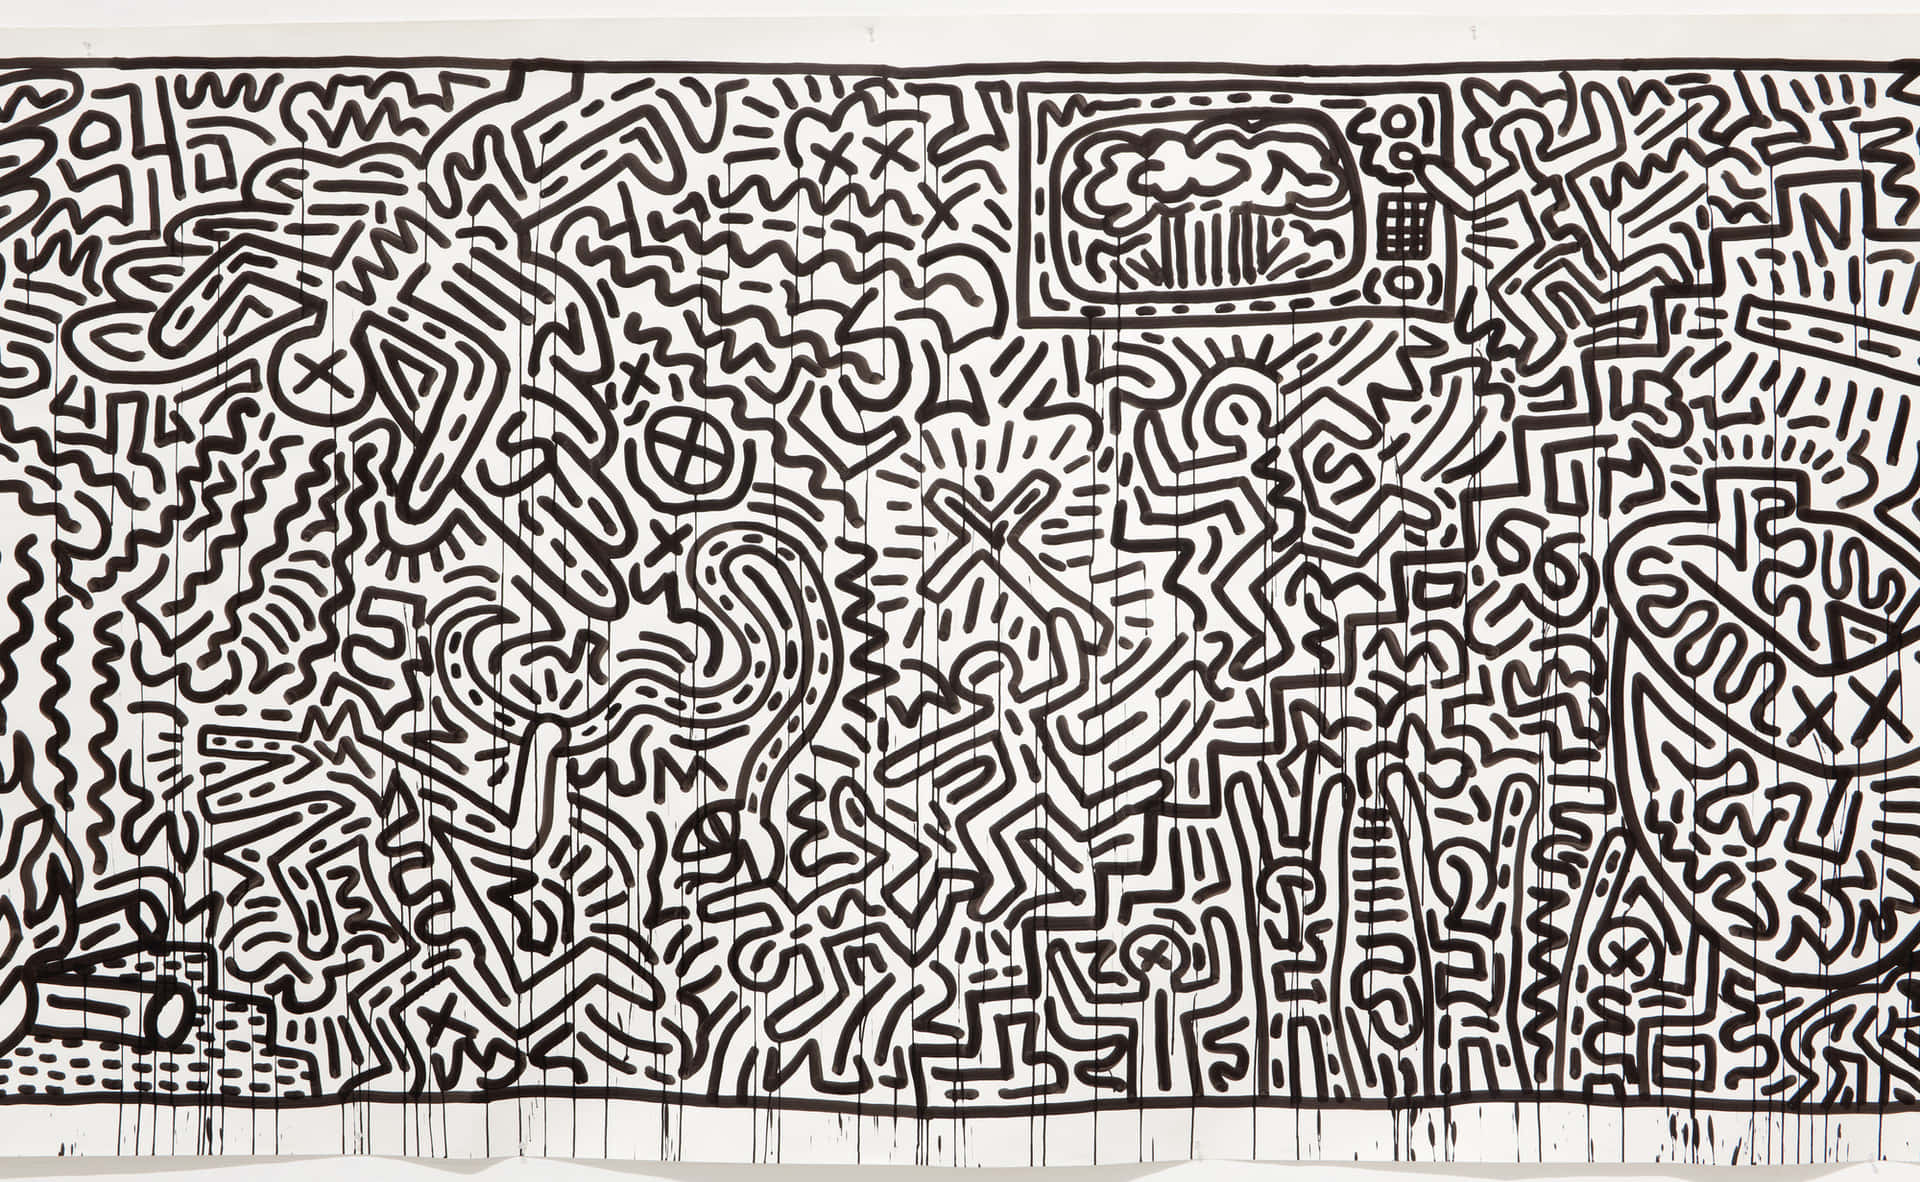 Keith Haring Intricate Doodle Art Wallpaper